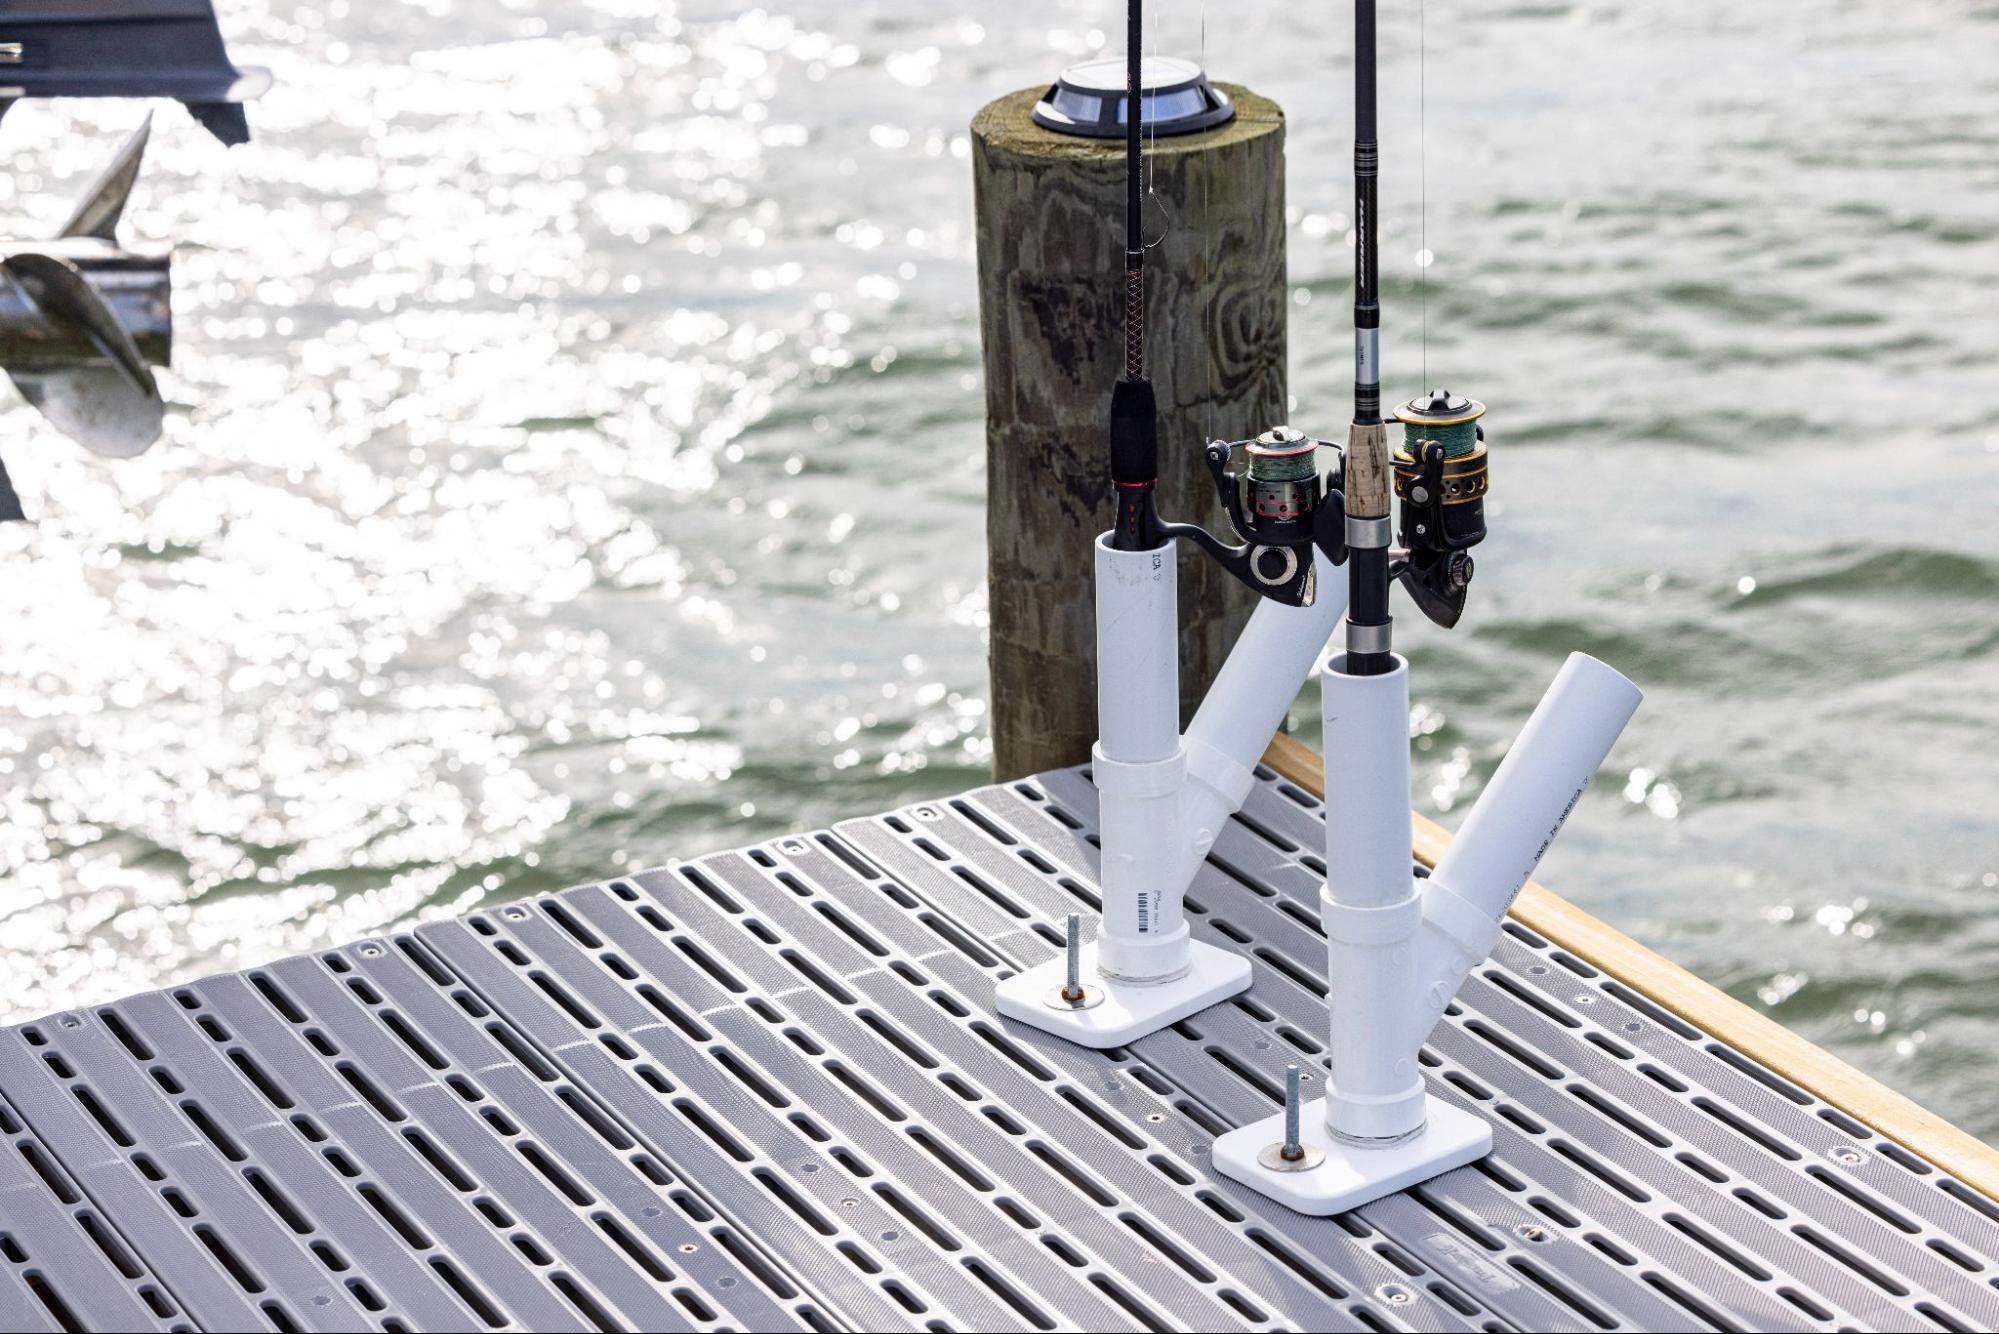 The photo depicts a close-up shot of two dock-mounted fishing rod holders. A wood pillar is attached at the corner of the dock and a body of water is in the background.